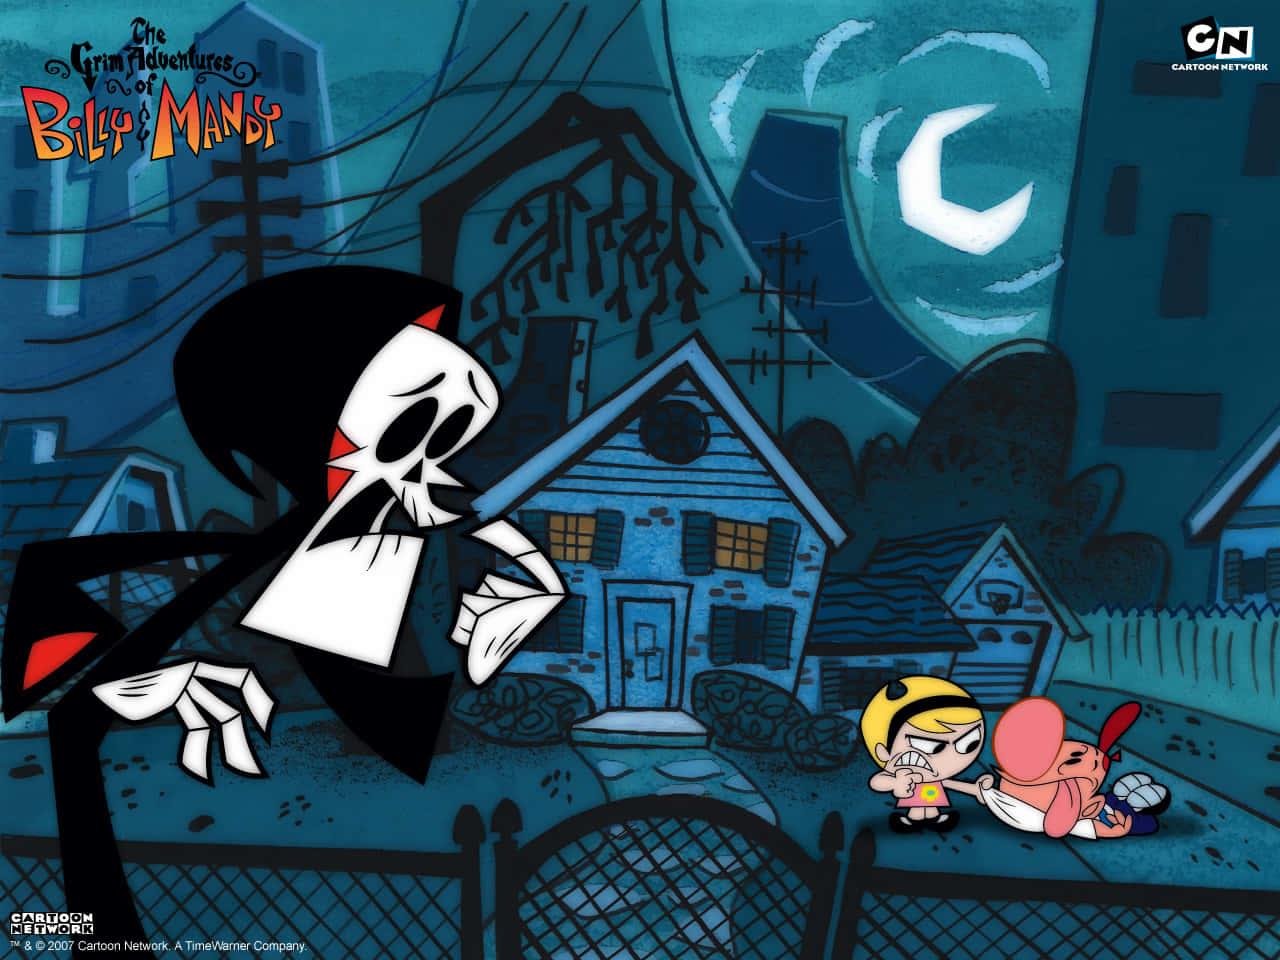 The Grim Adventures of Billy and Mandy - Classic Animated Series Wallpaper